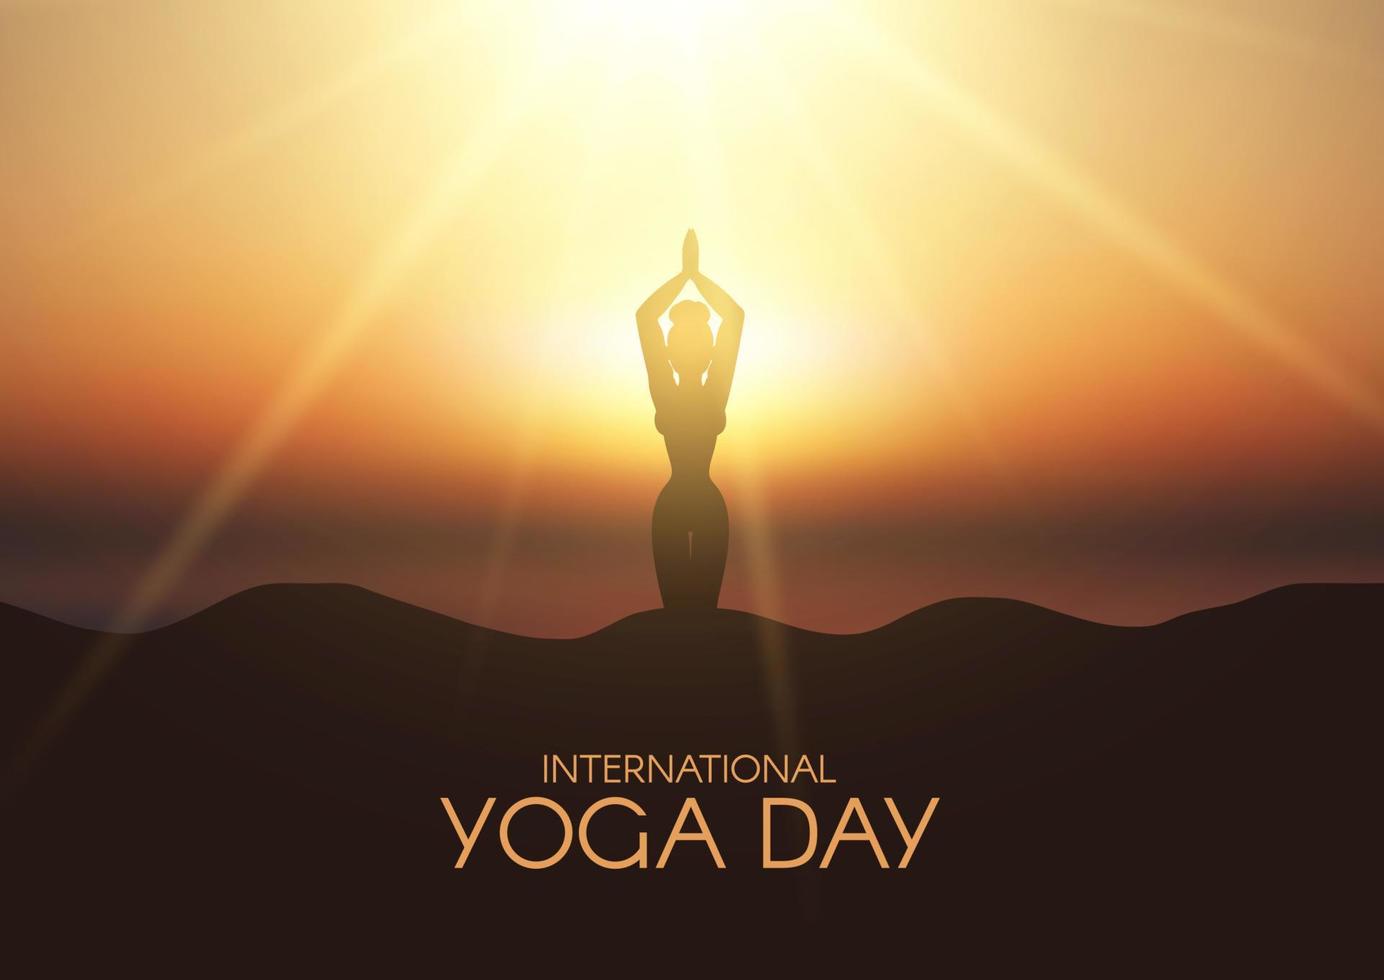 international yoga day background with female in yoga pose in sunset landscape vector